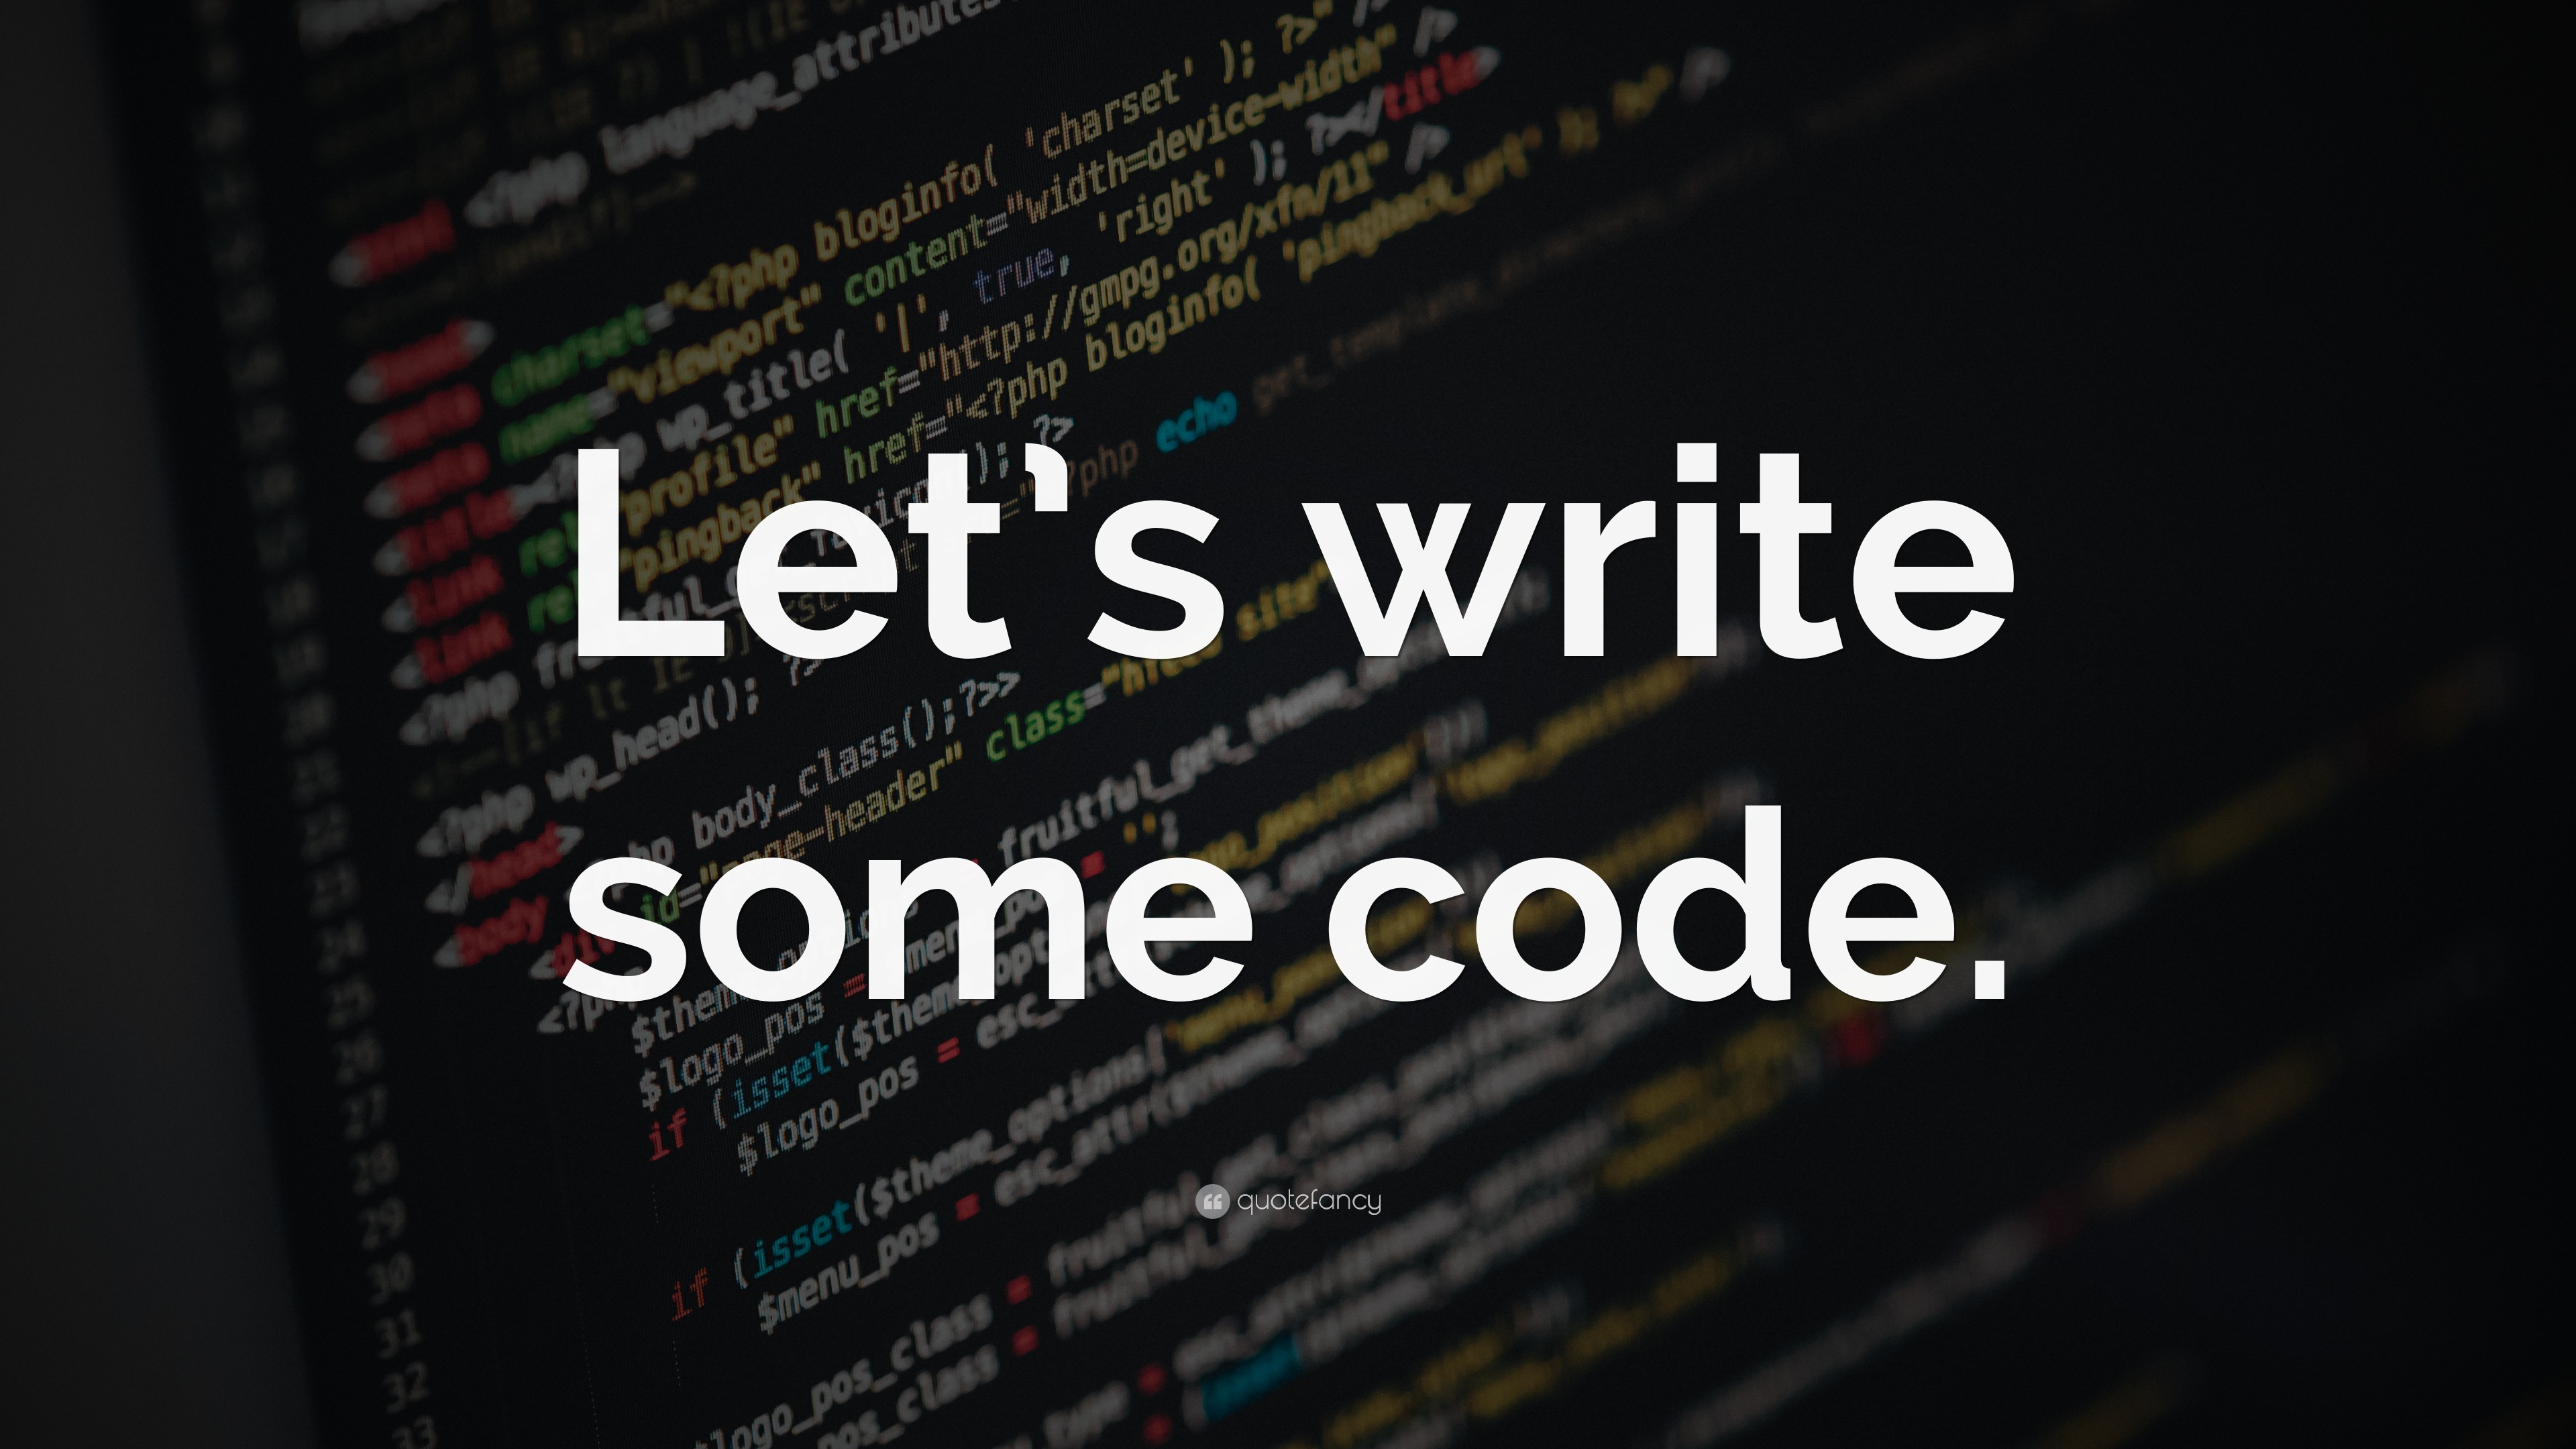 “Let’s write some code.” Wallpaper by QuoteFancy